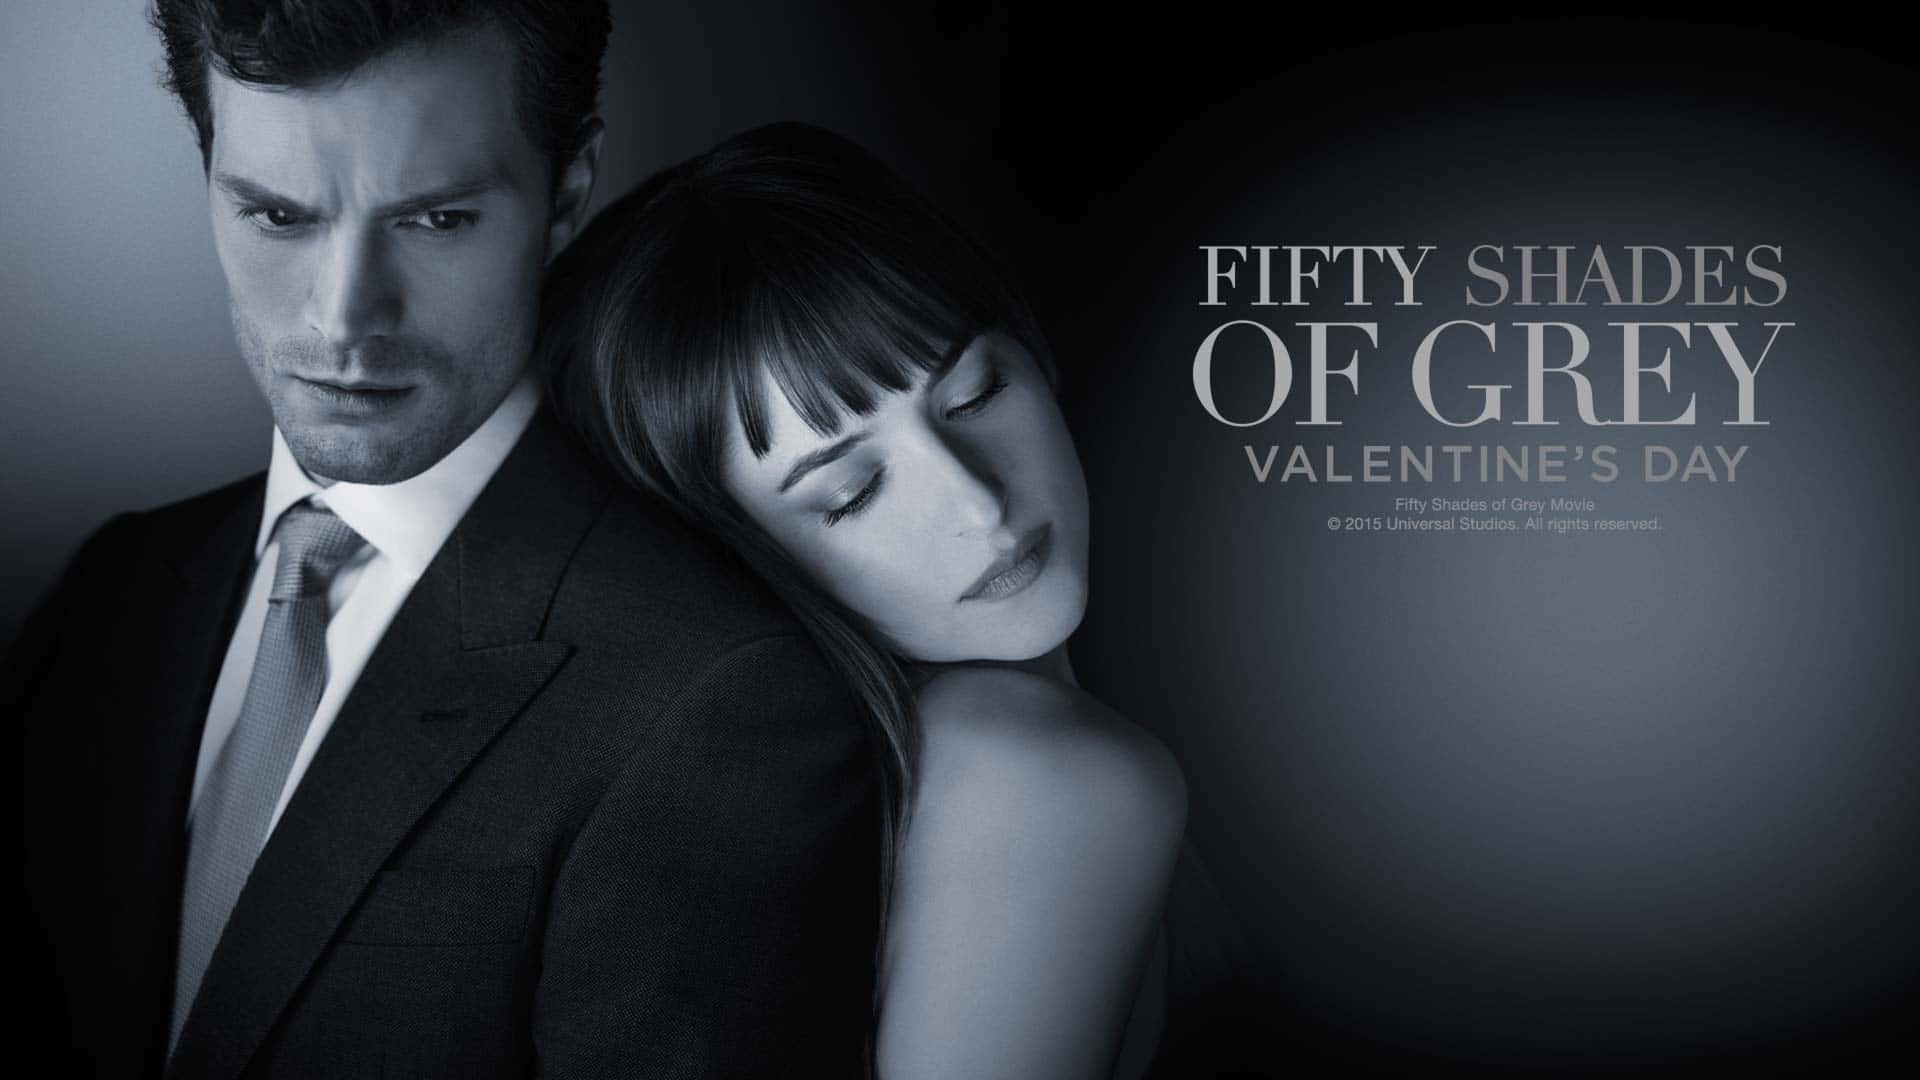 Fifty Shades Of Grey Promotional Poster